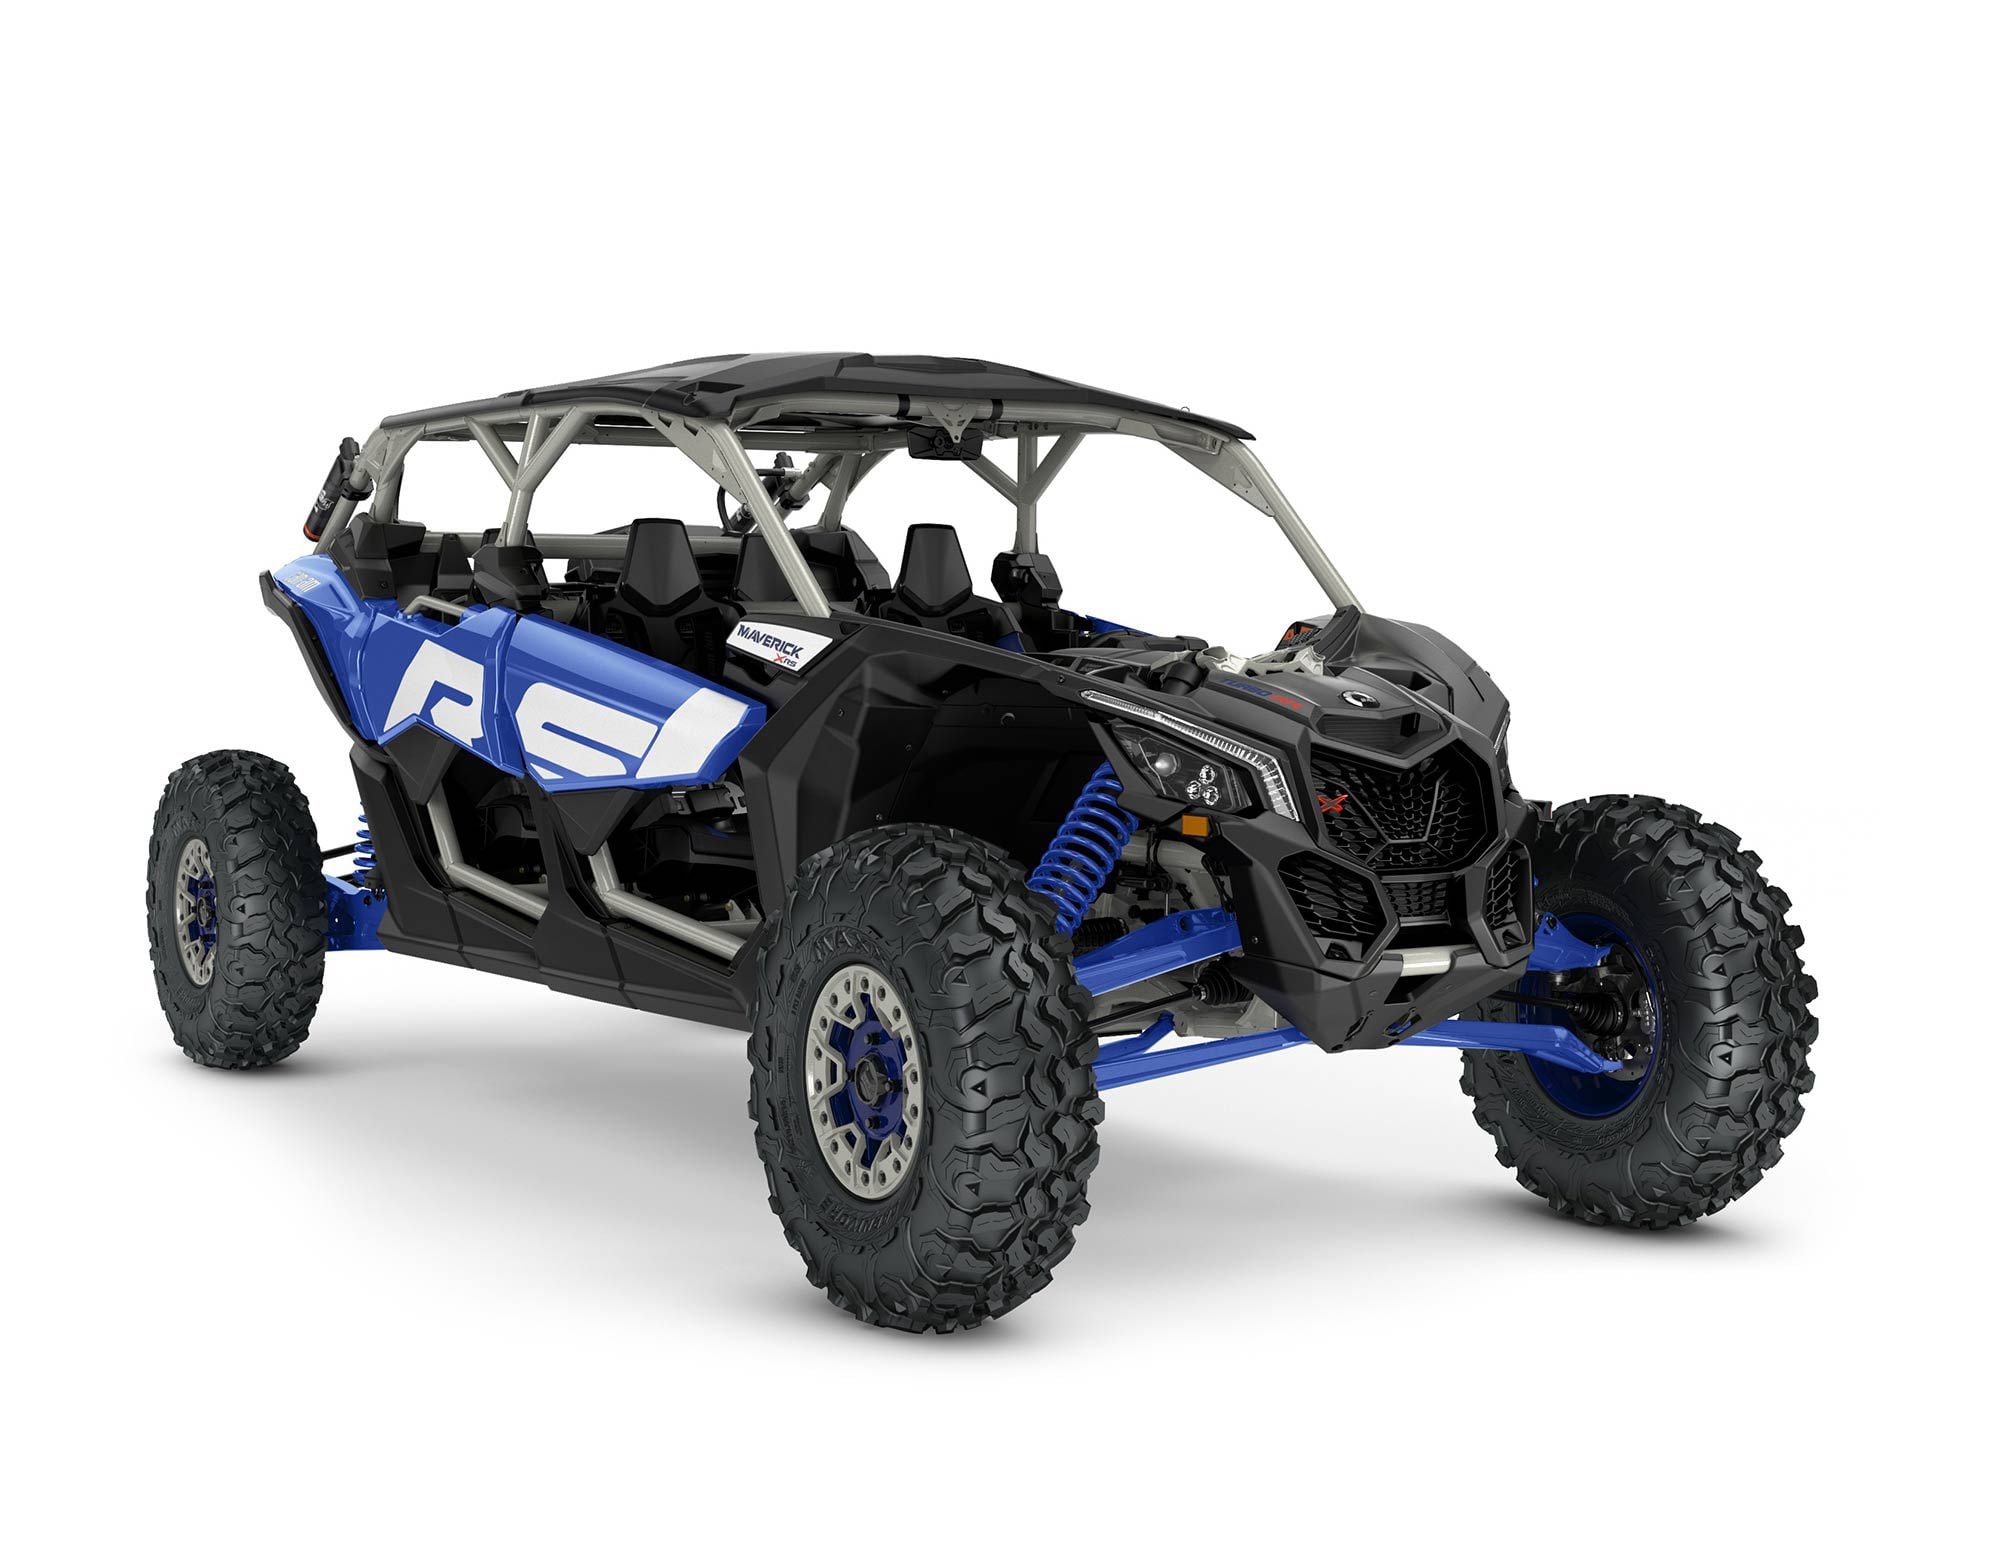 2022 Can-Am Maverick X3 Max X RS Turbo RR with Smart Shox front view in Intense Blue, Carbon Black, and Chalk Gray color.